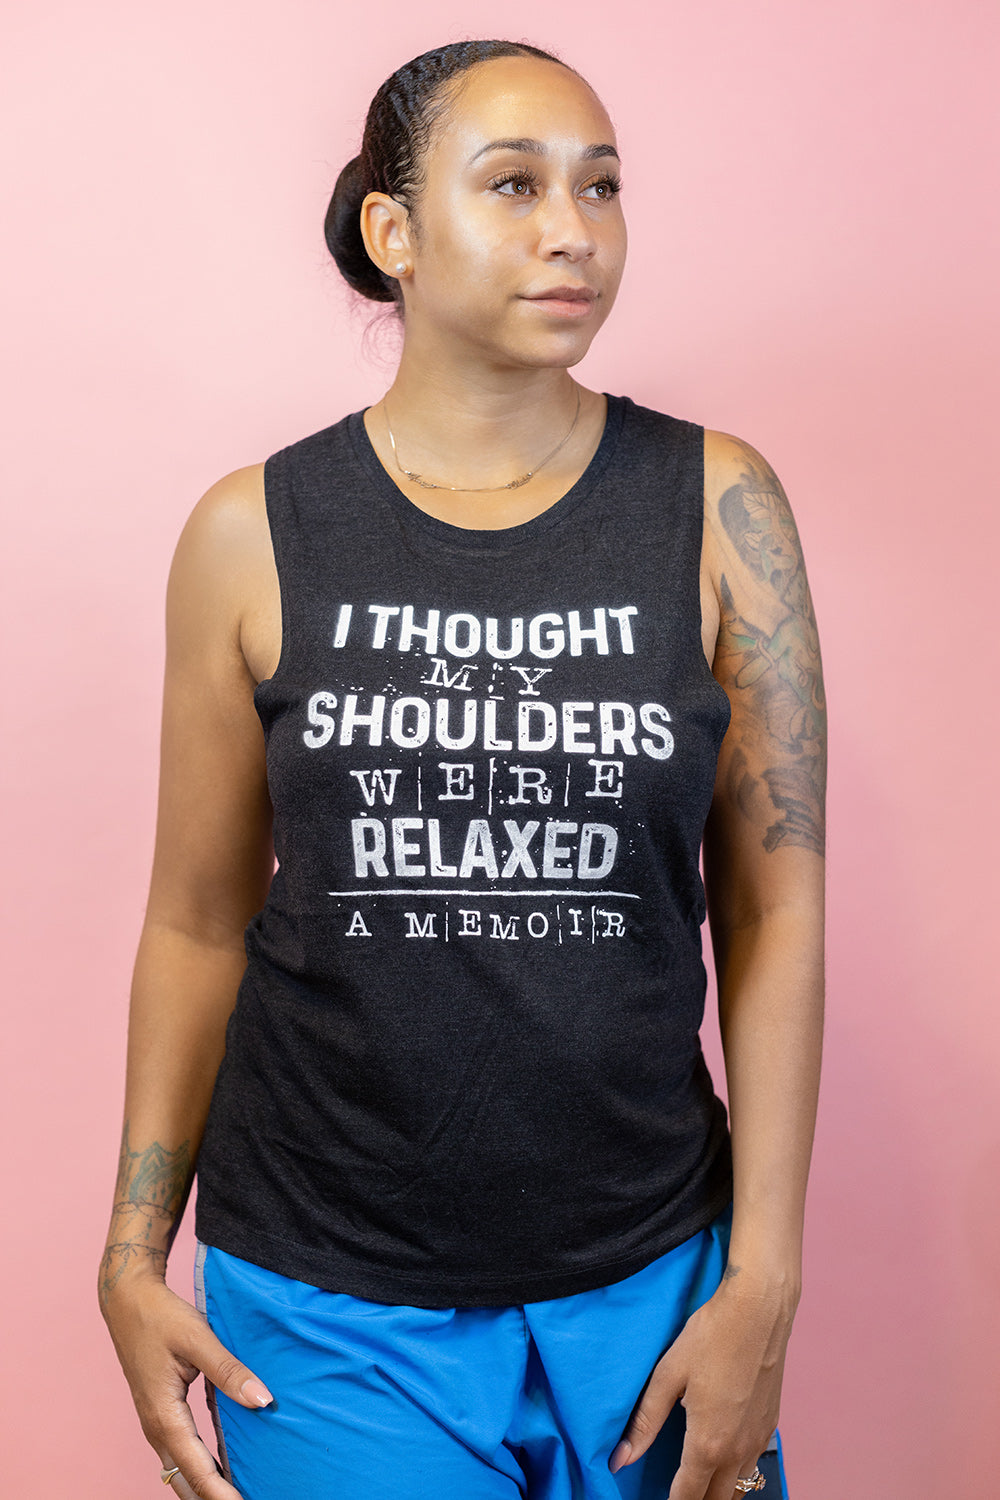 Woman wearing a black muscle tank top that says "I thought my shoulders were relaxed- a memoir" in white text. Woman is leaning against a peach background.